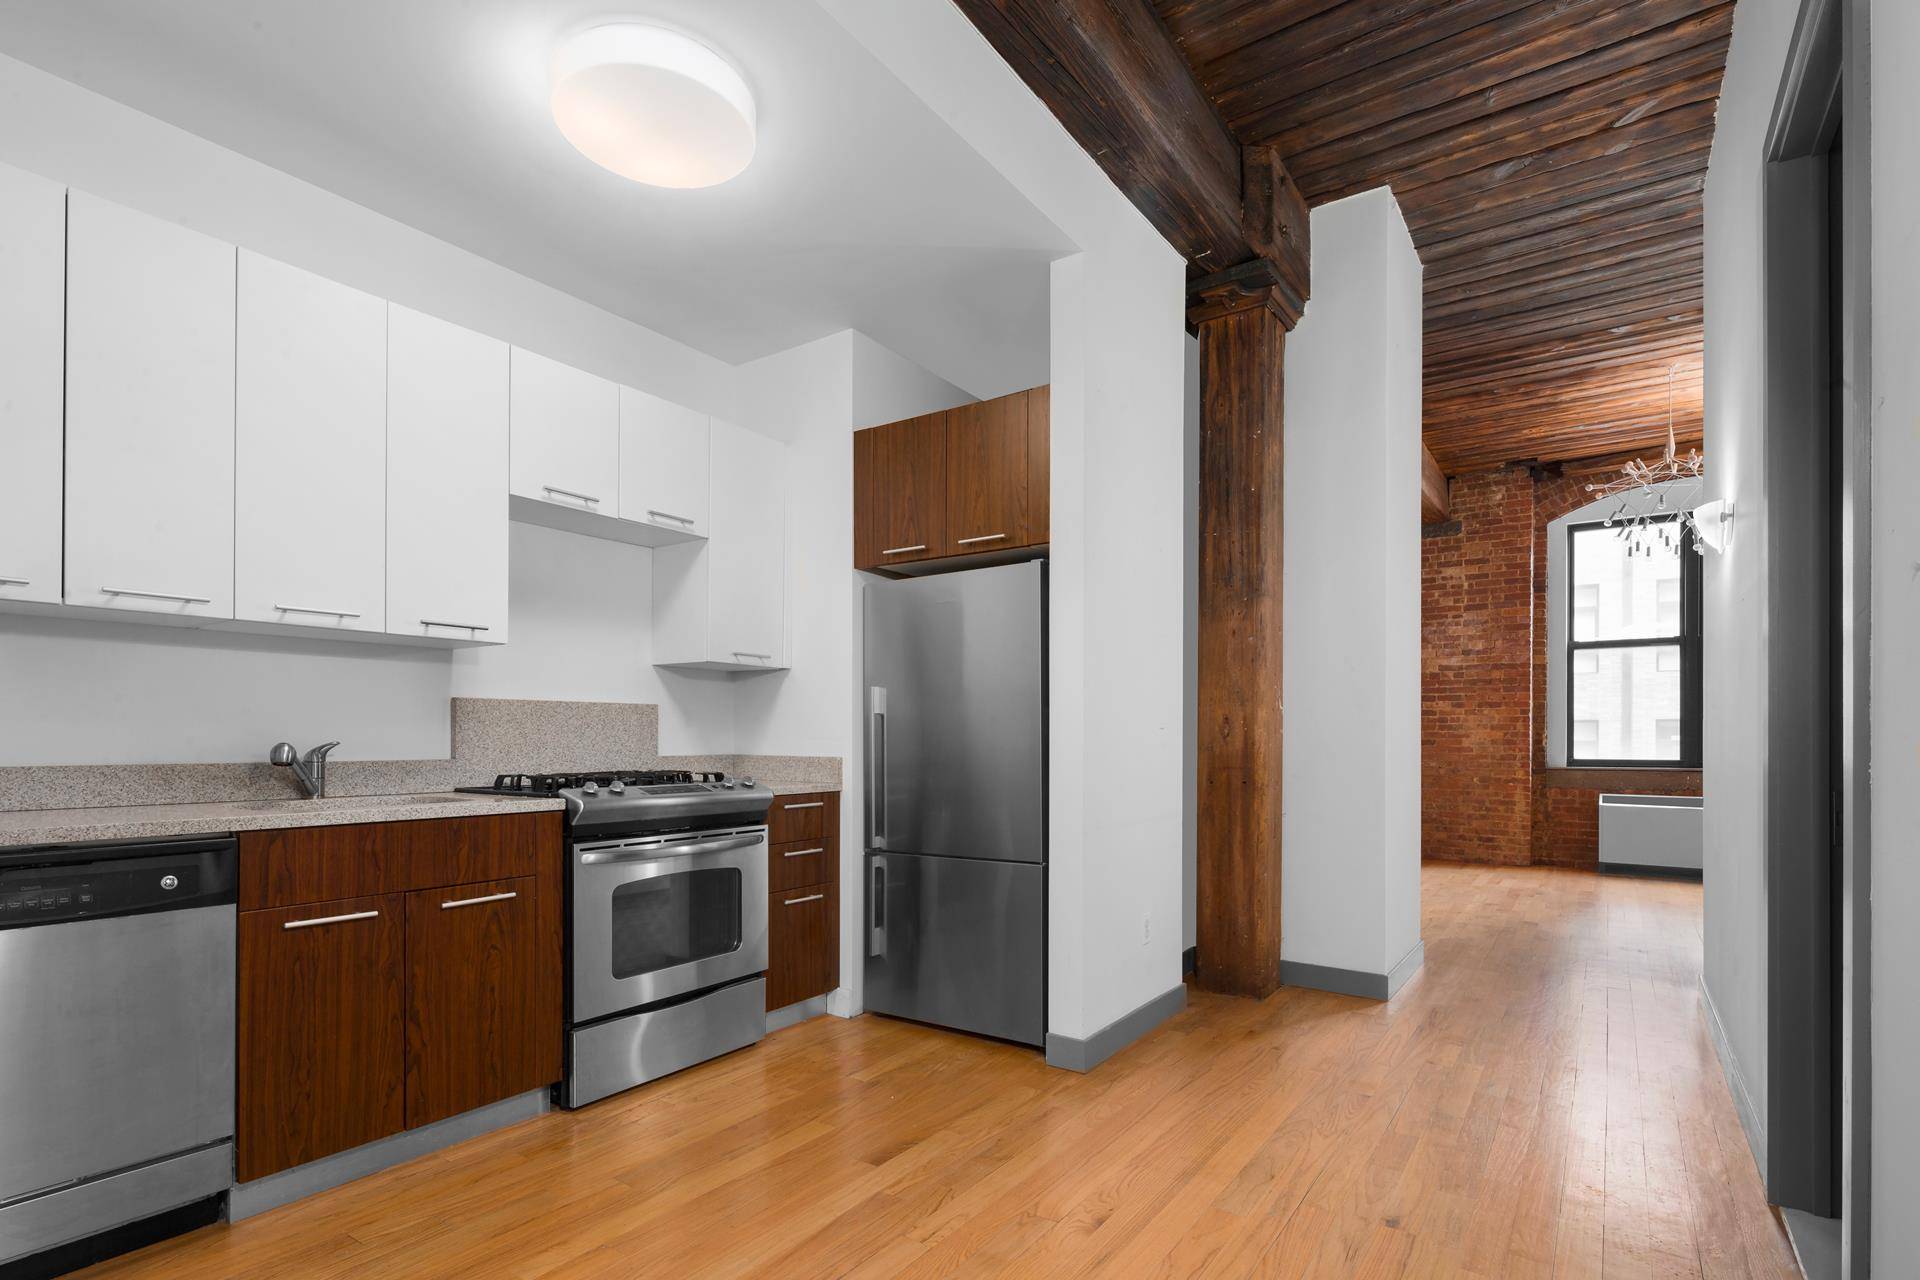 Rent Stabilized ! ! ! ! Upon entering this spacious alcove studio you are immediately greeted by the original wooden beams and restored wooden ceilings which compliment this unique home.